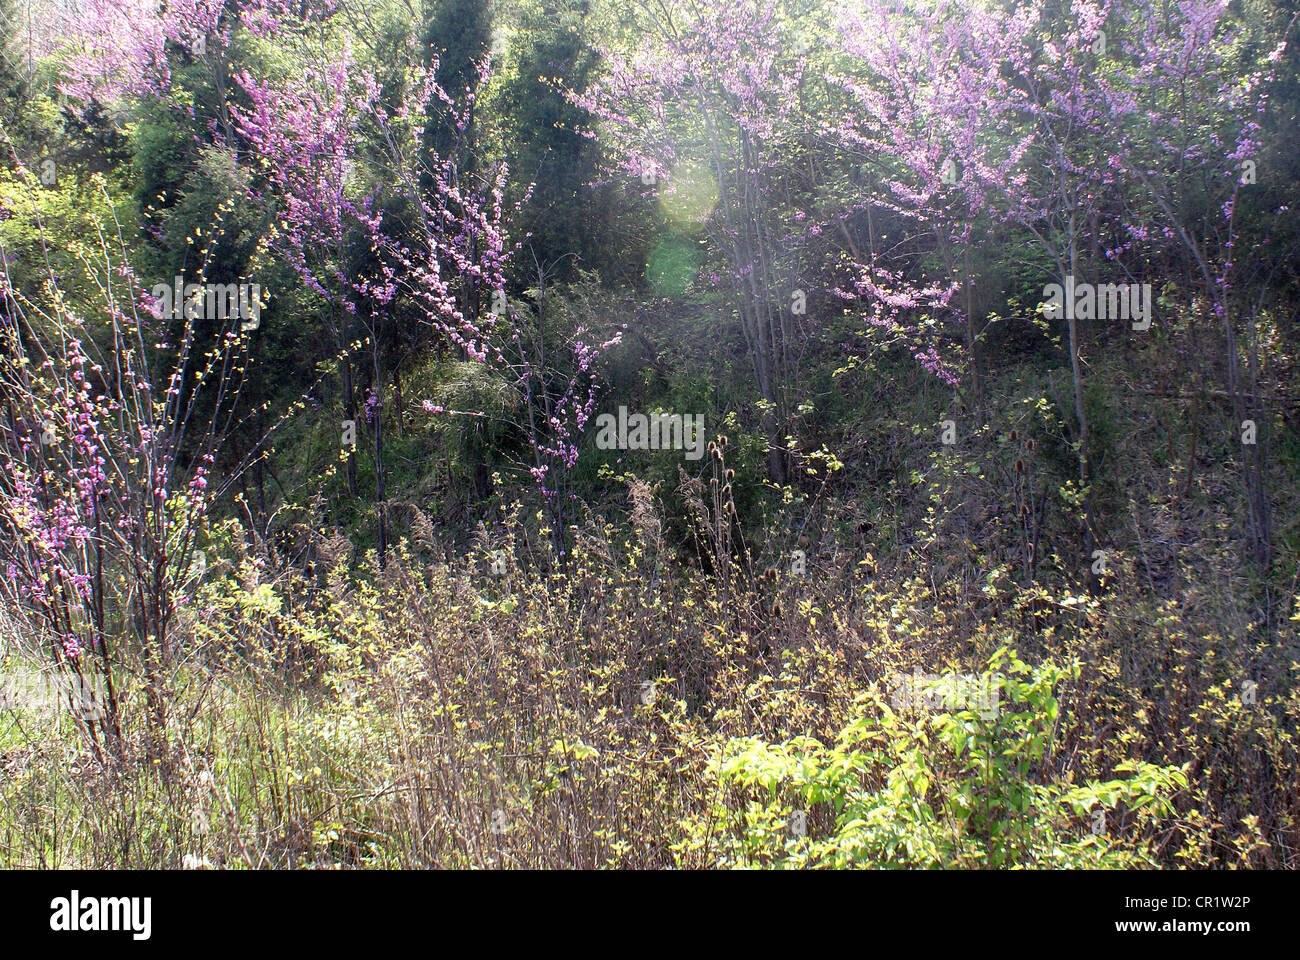 Early Spring Redbud trees and green bushes blooming alongside dark pines. Stock Photo